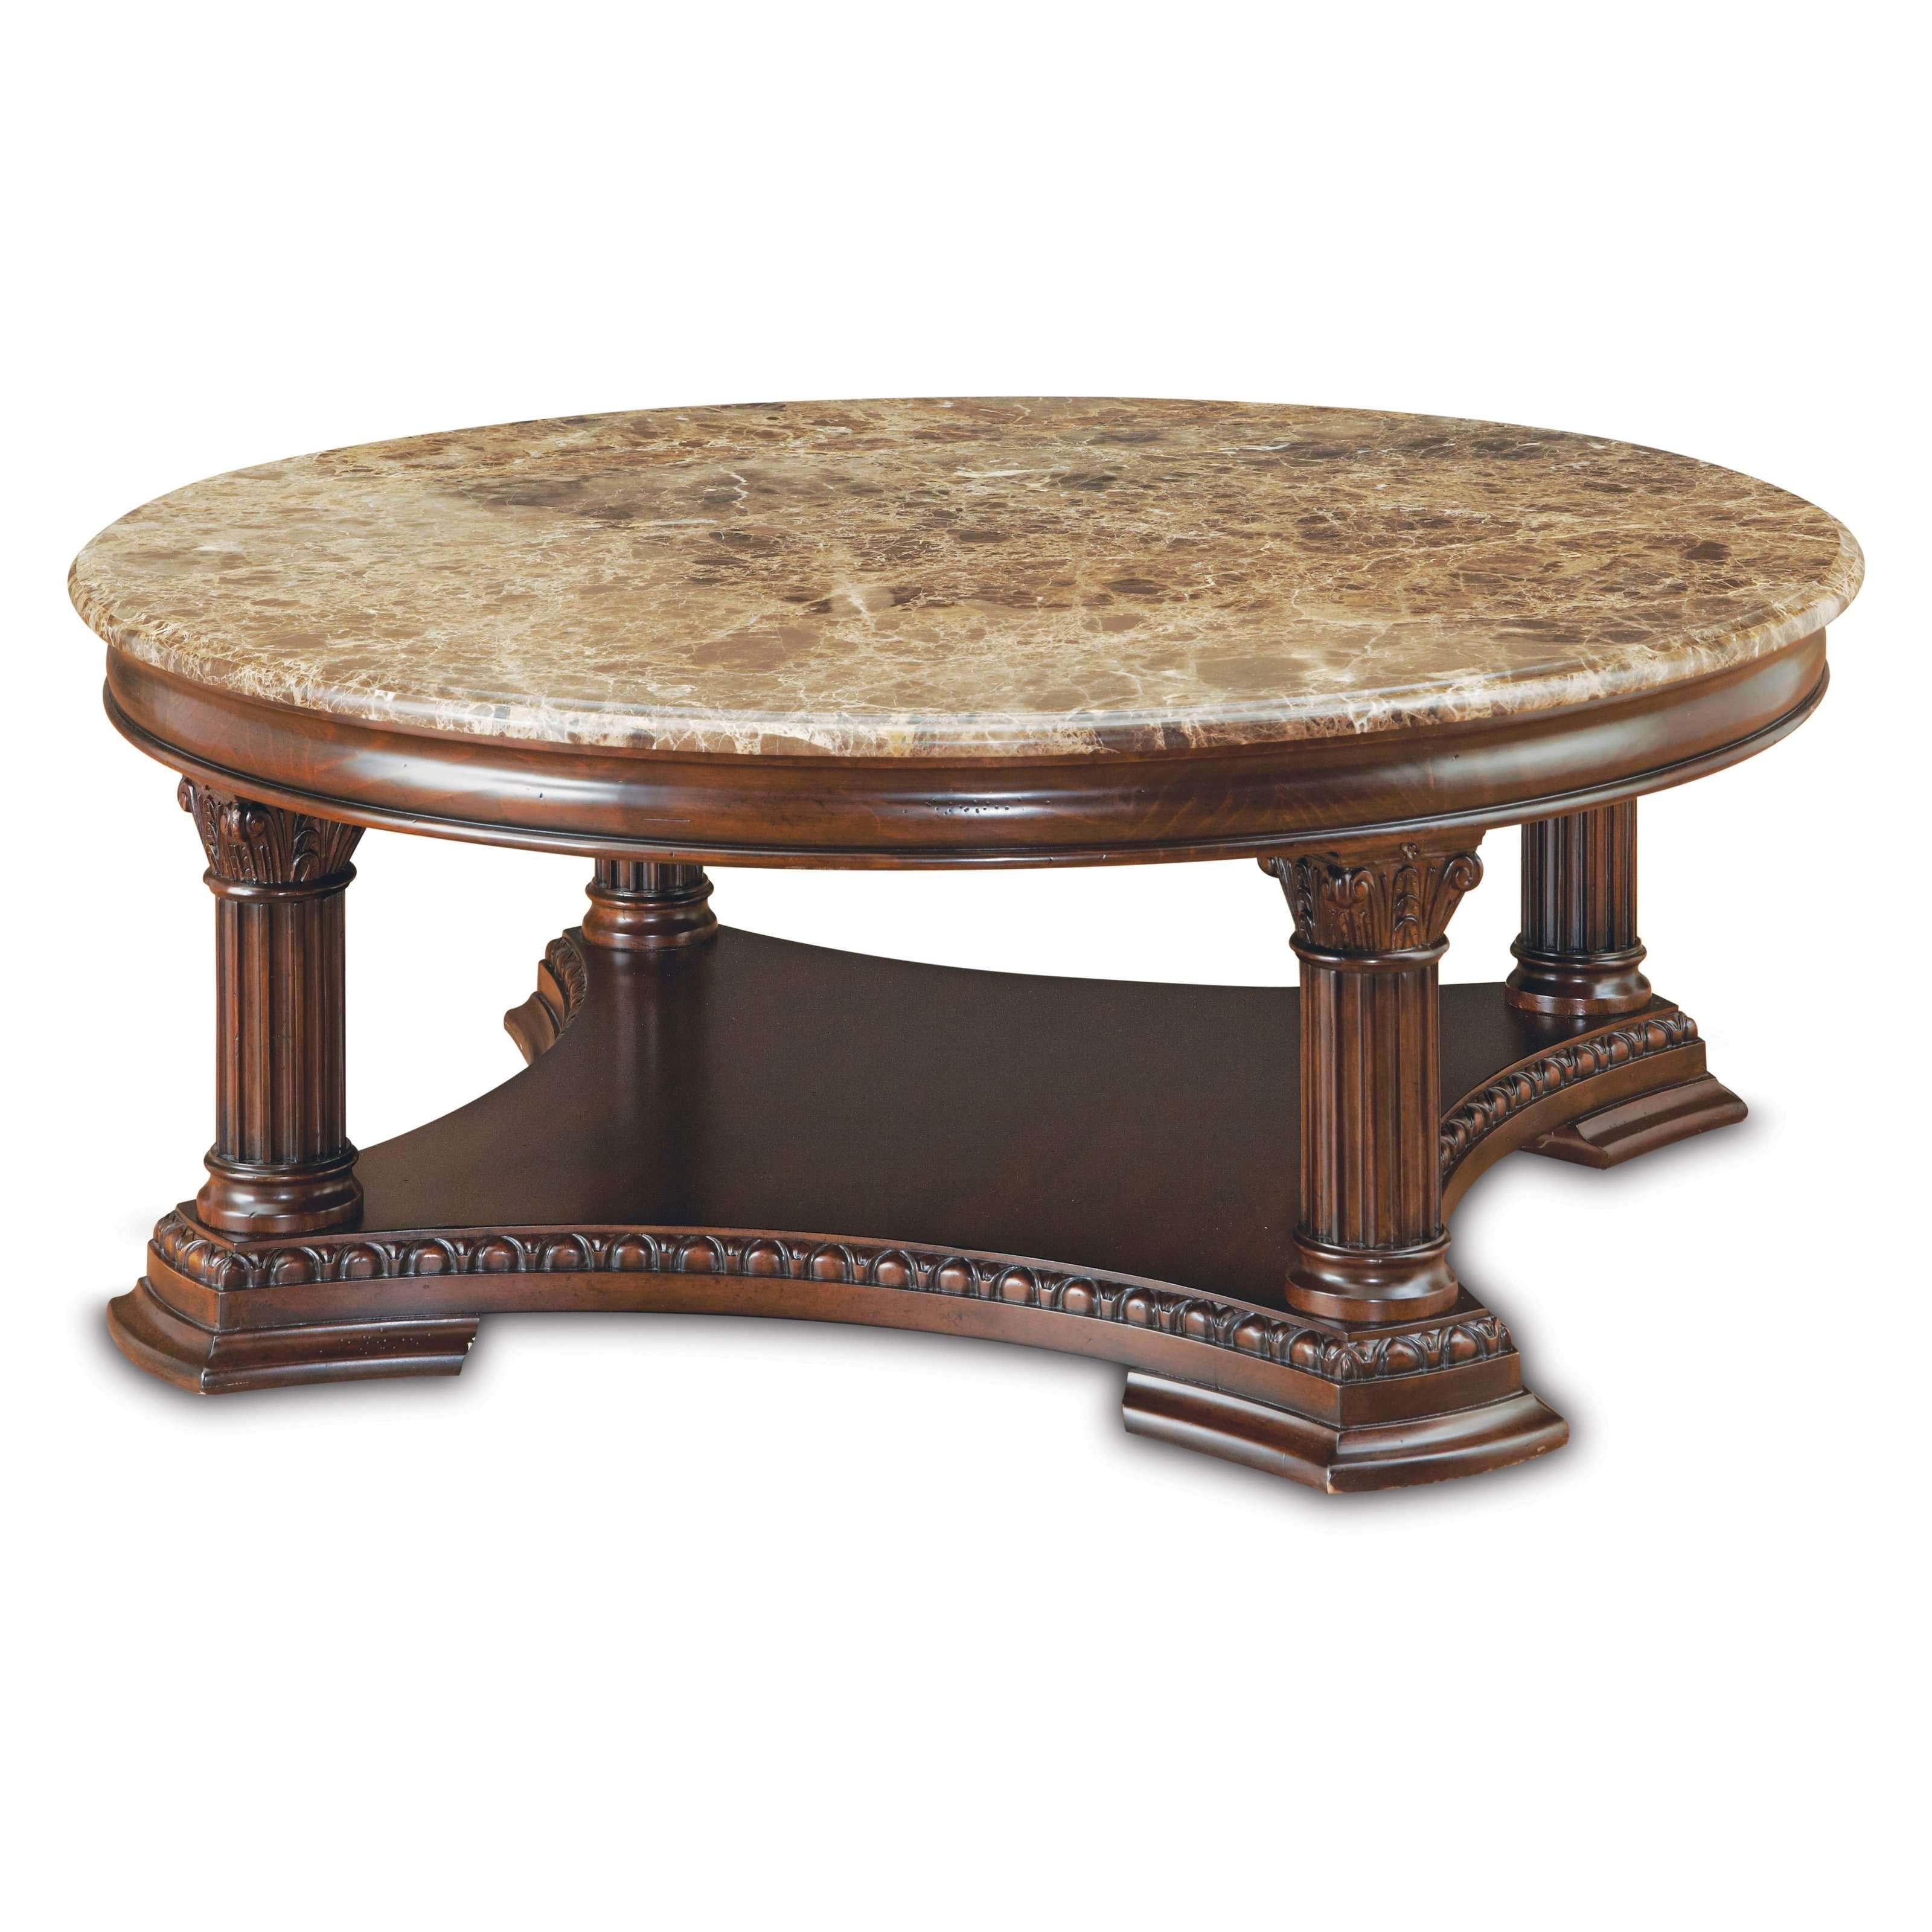 Coffee Tables : Hammered Metal Coffee Table Large Round Glass Low Throughout Famous Large Round Low Coffee Tables (Gallery 11 of 20)